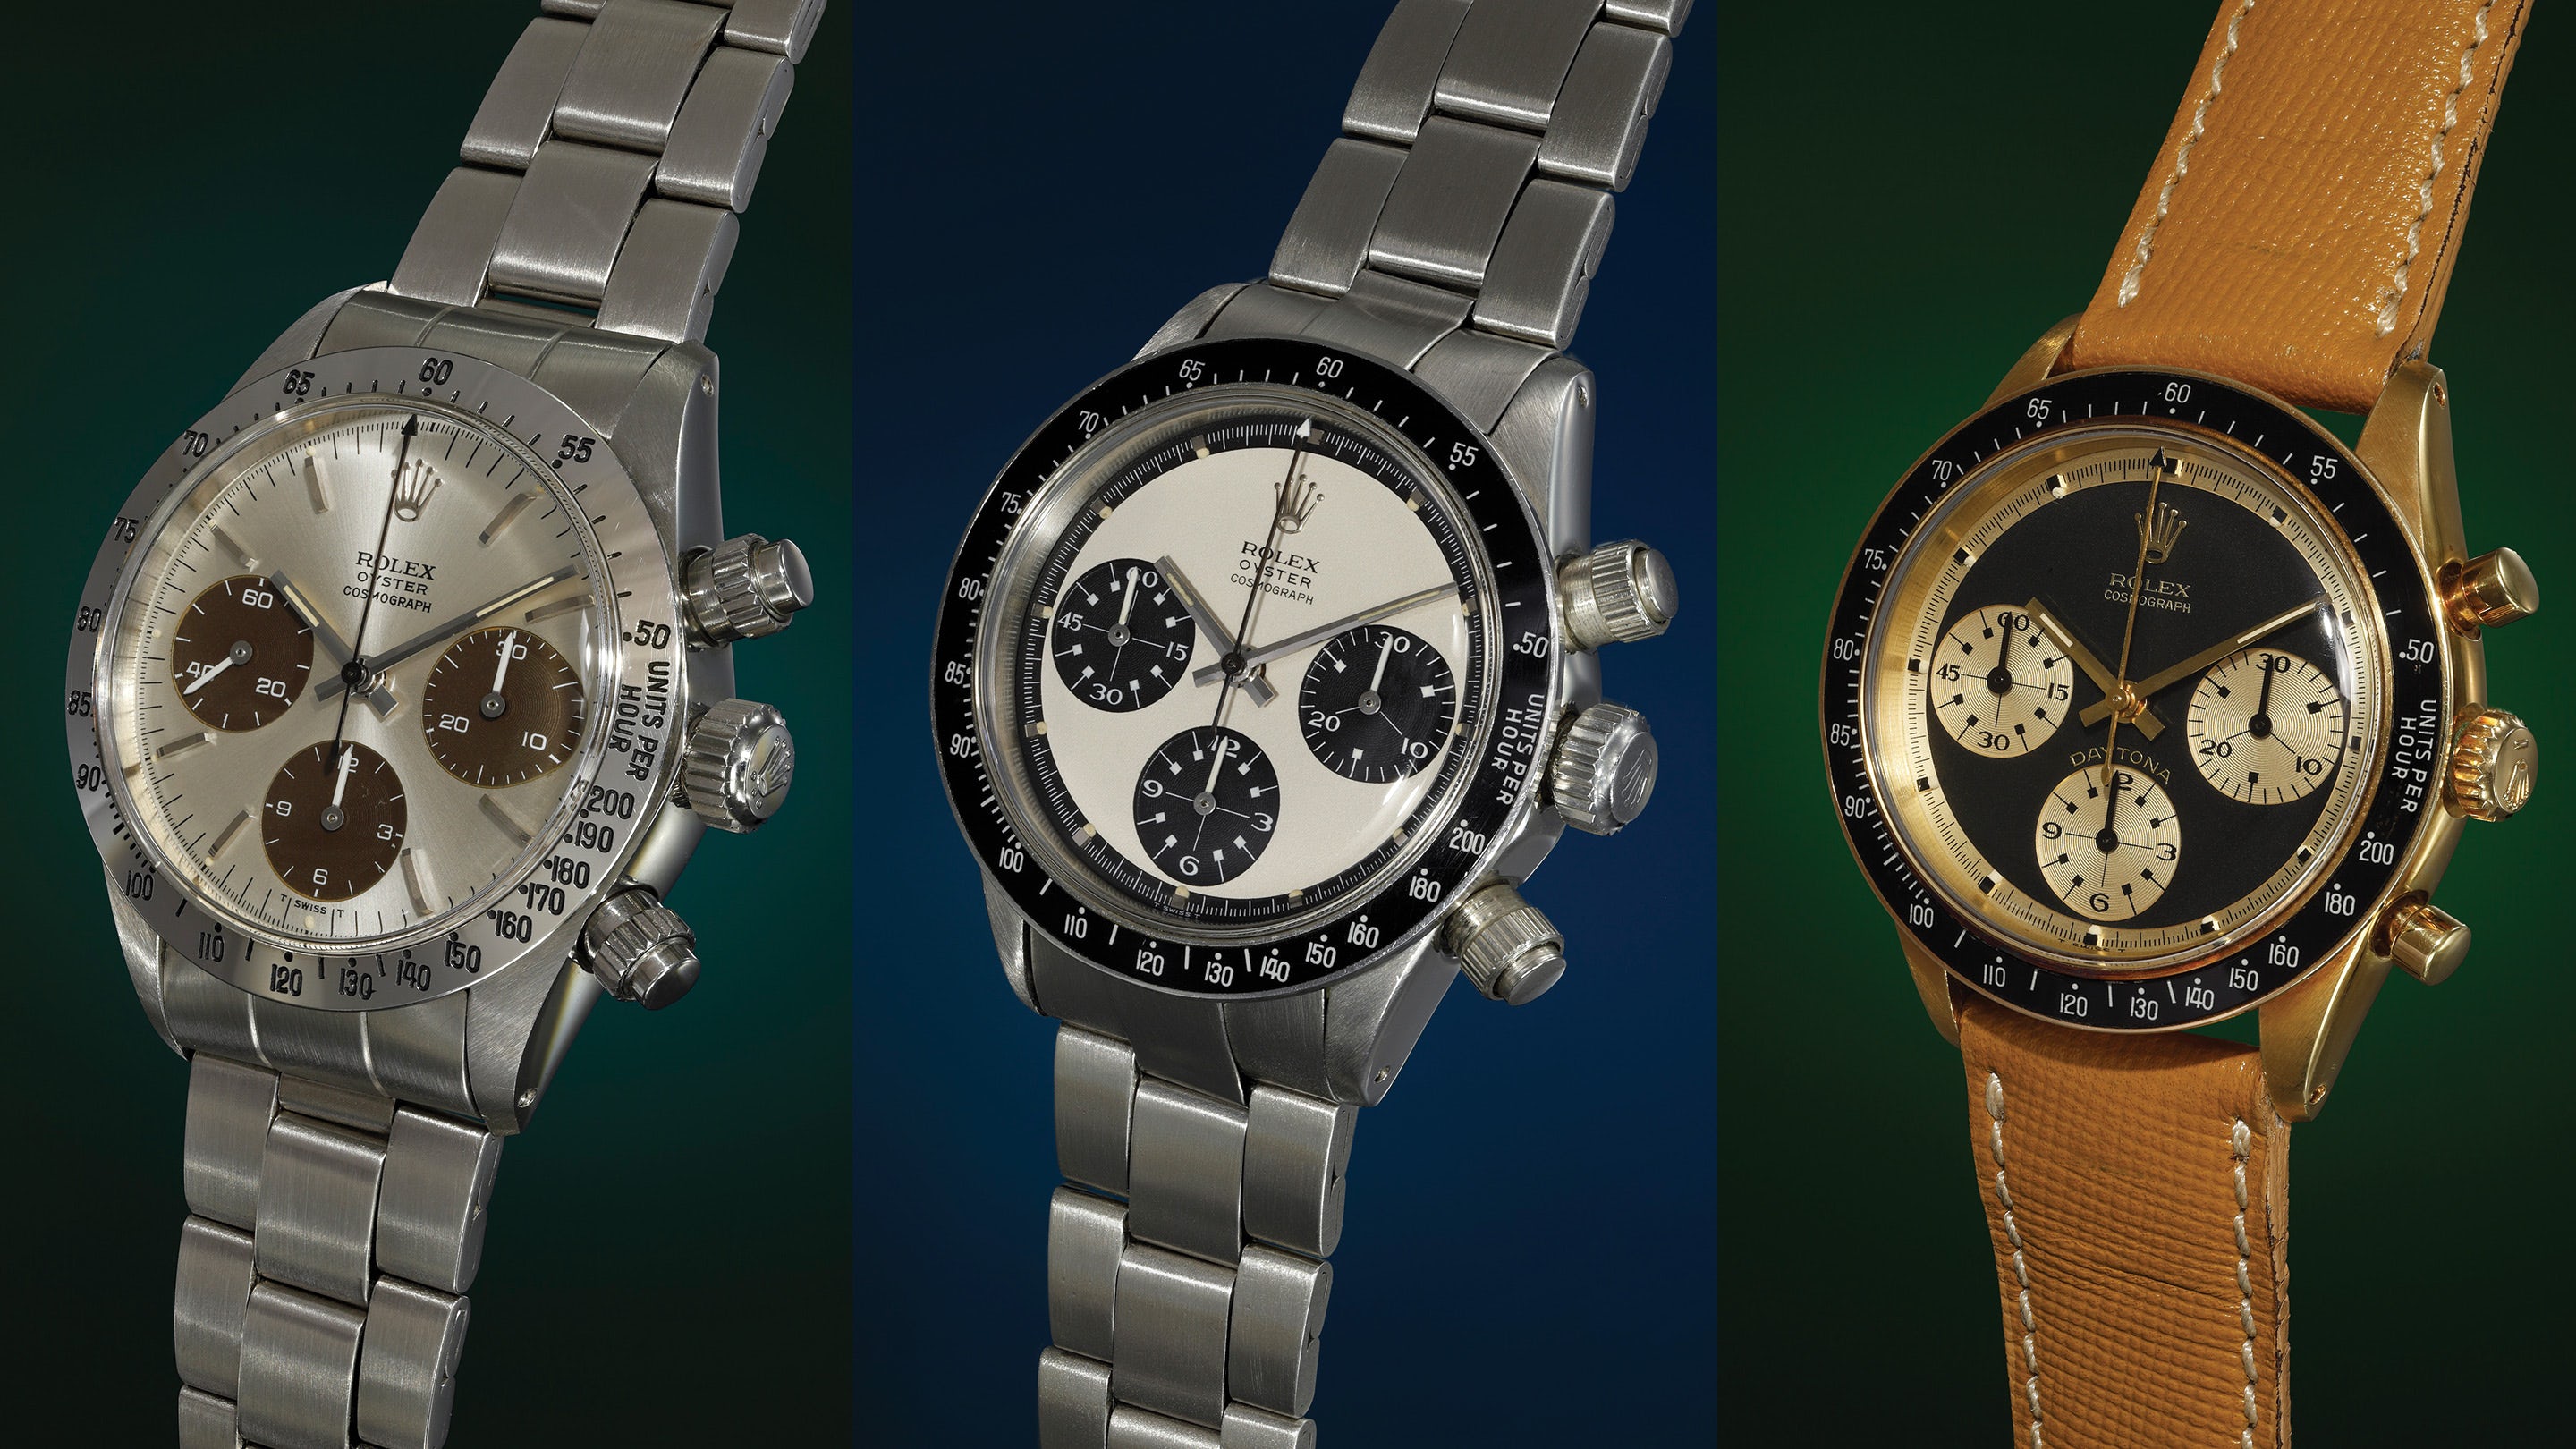 Which one of these watches is worth only $200,000?